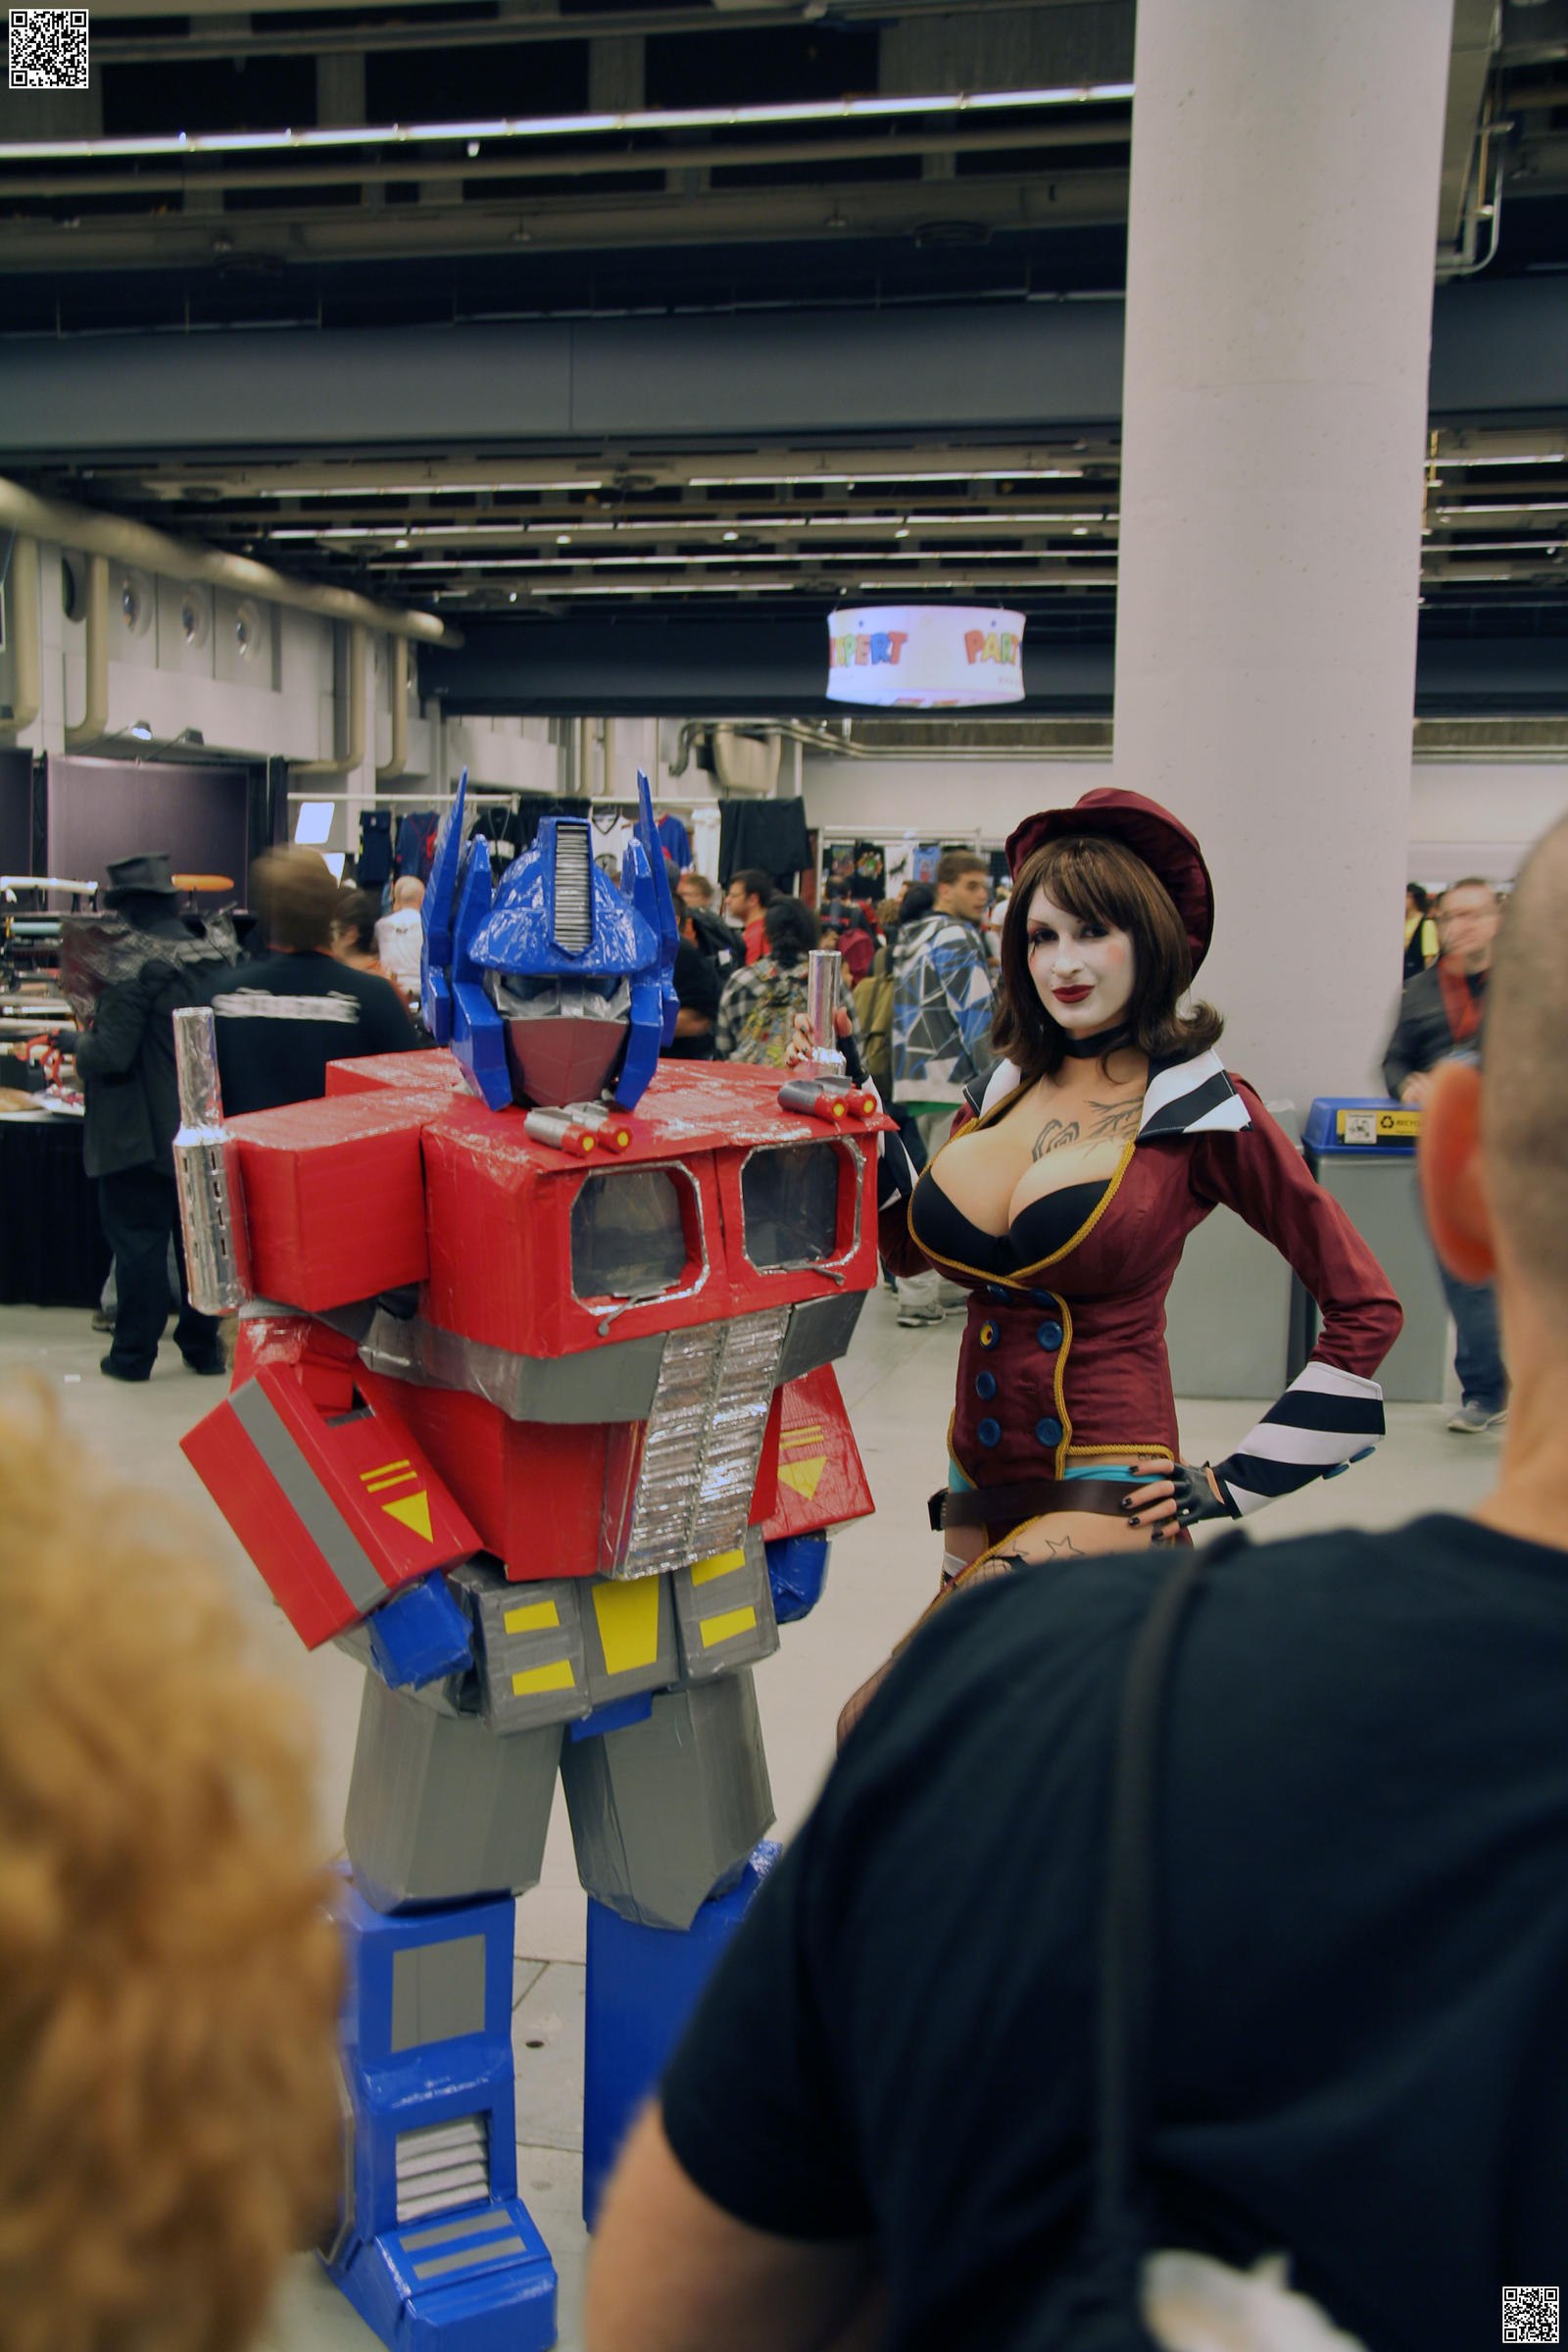 comicon_montreal_2012_by_ariane_saint_amour-d5exr66.jpg